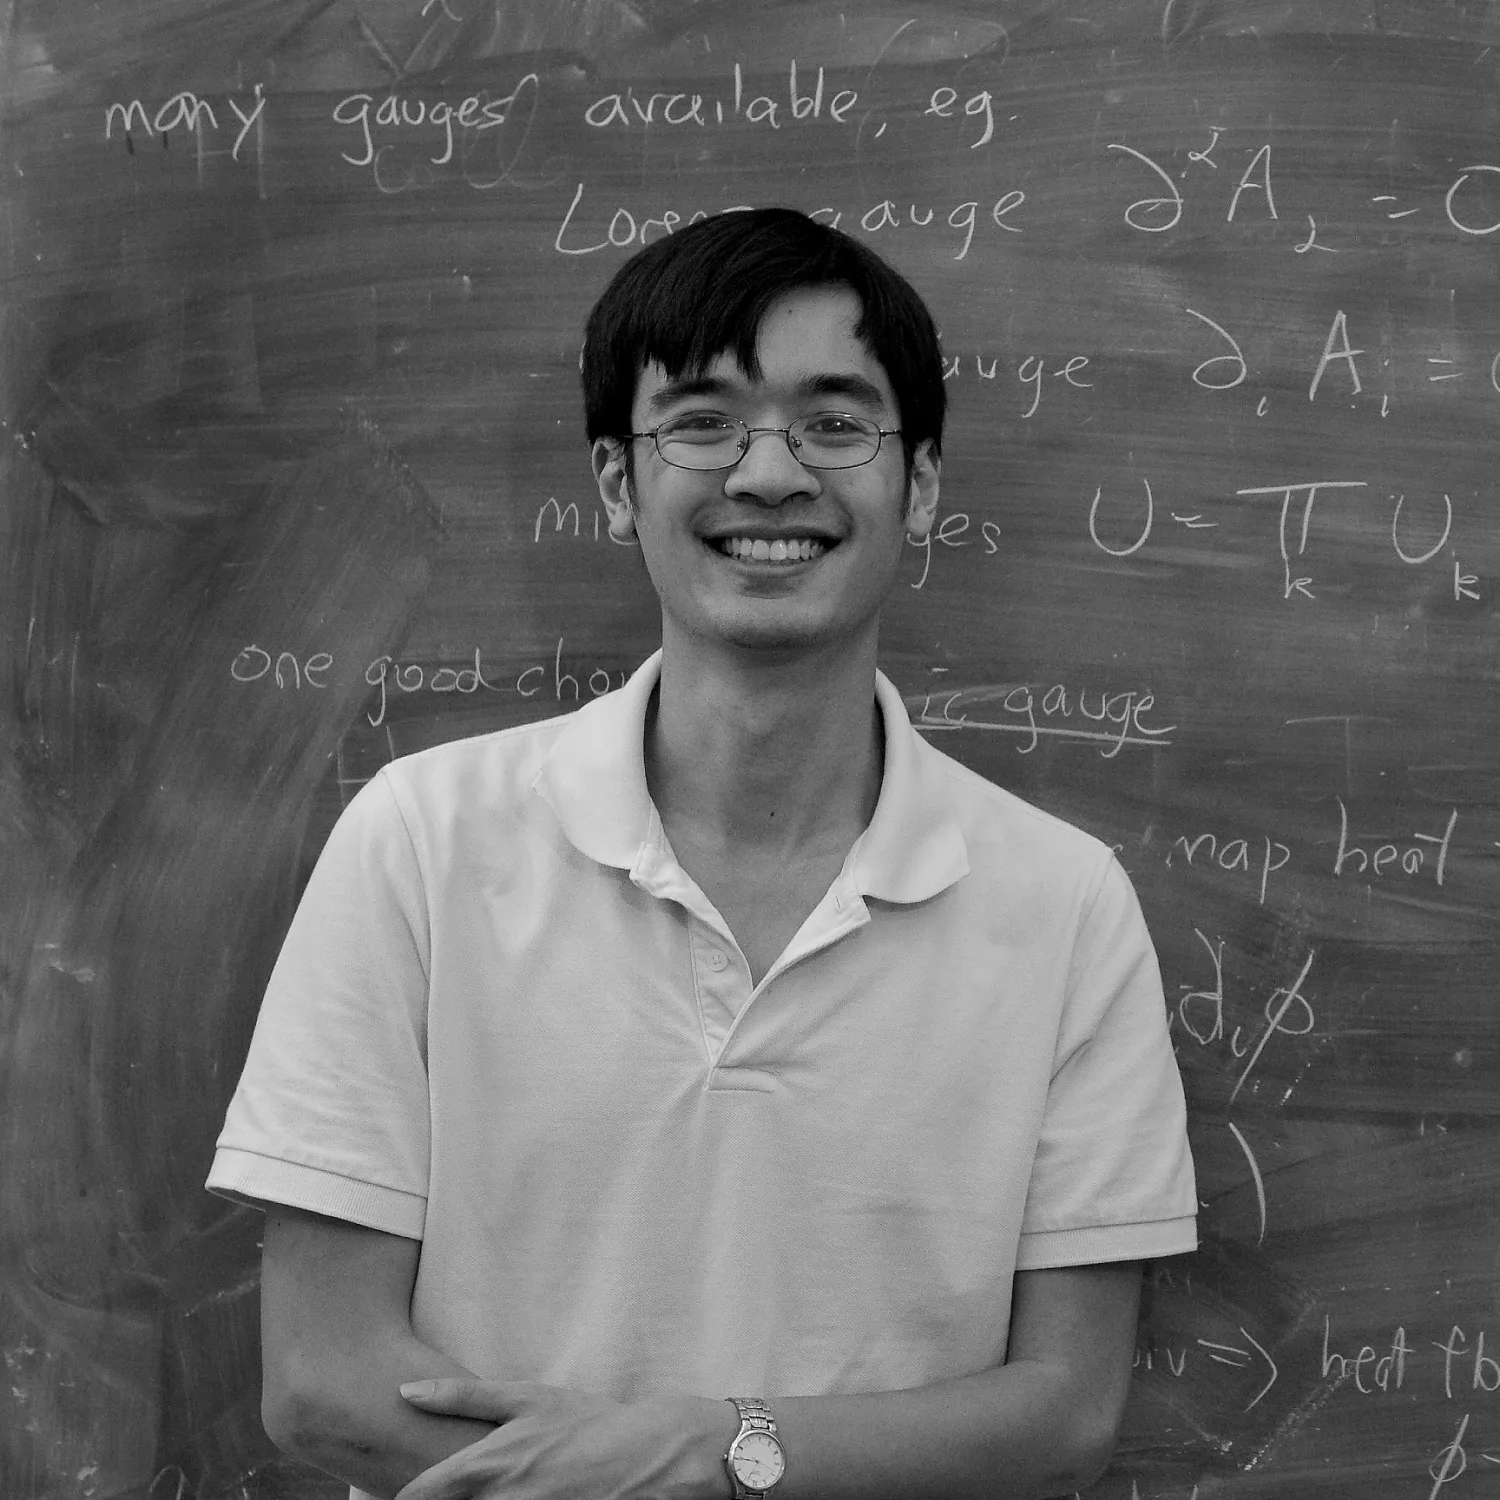 A portrait of Terence Tao